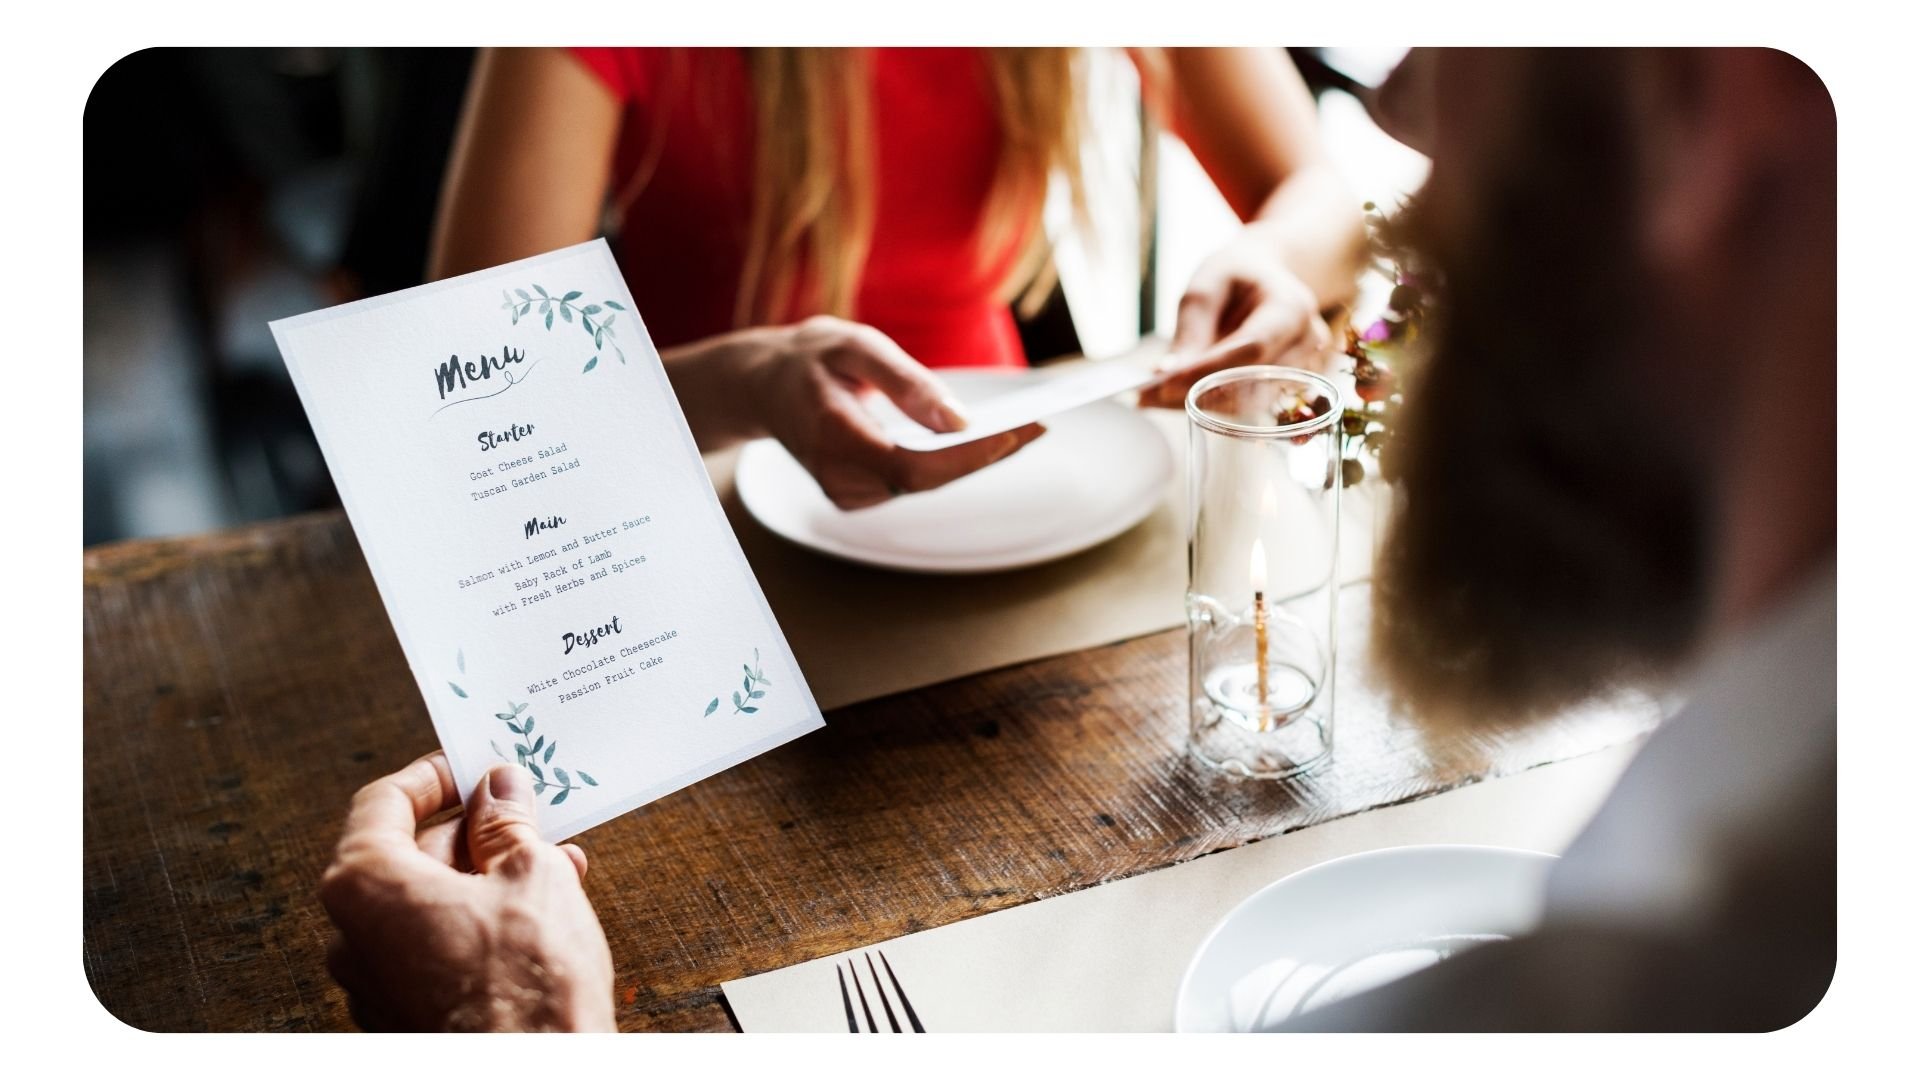 Diners reviewing the menu in a restaurant